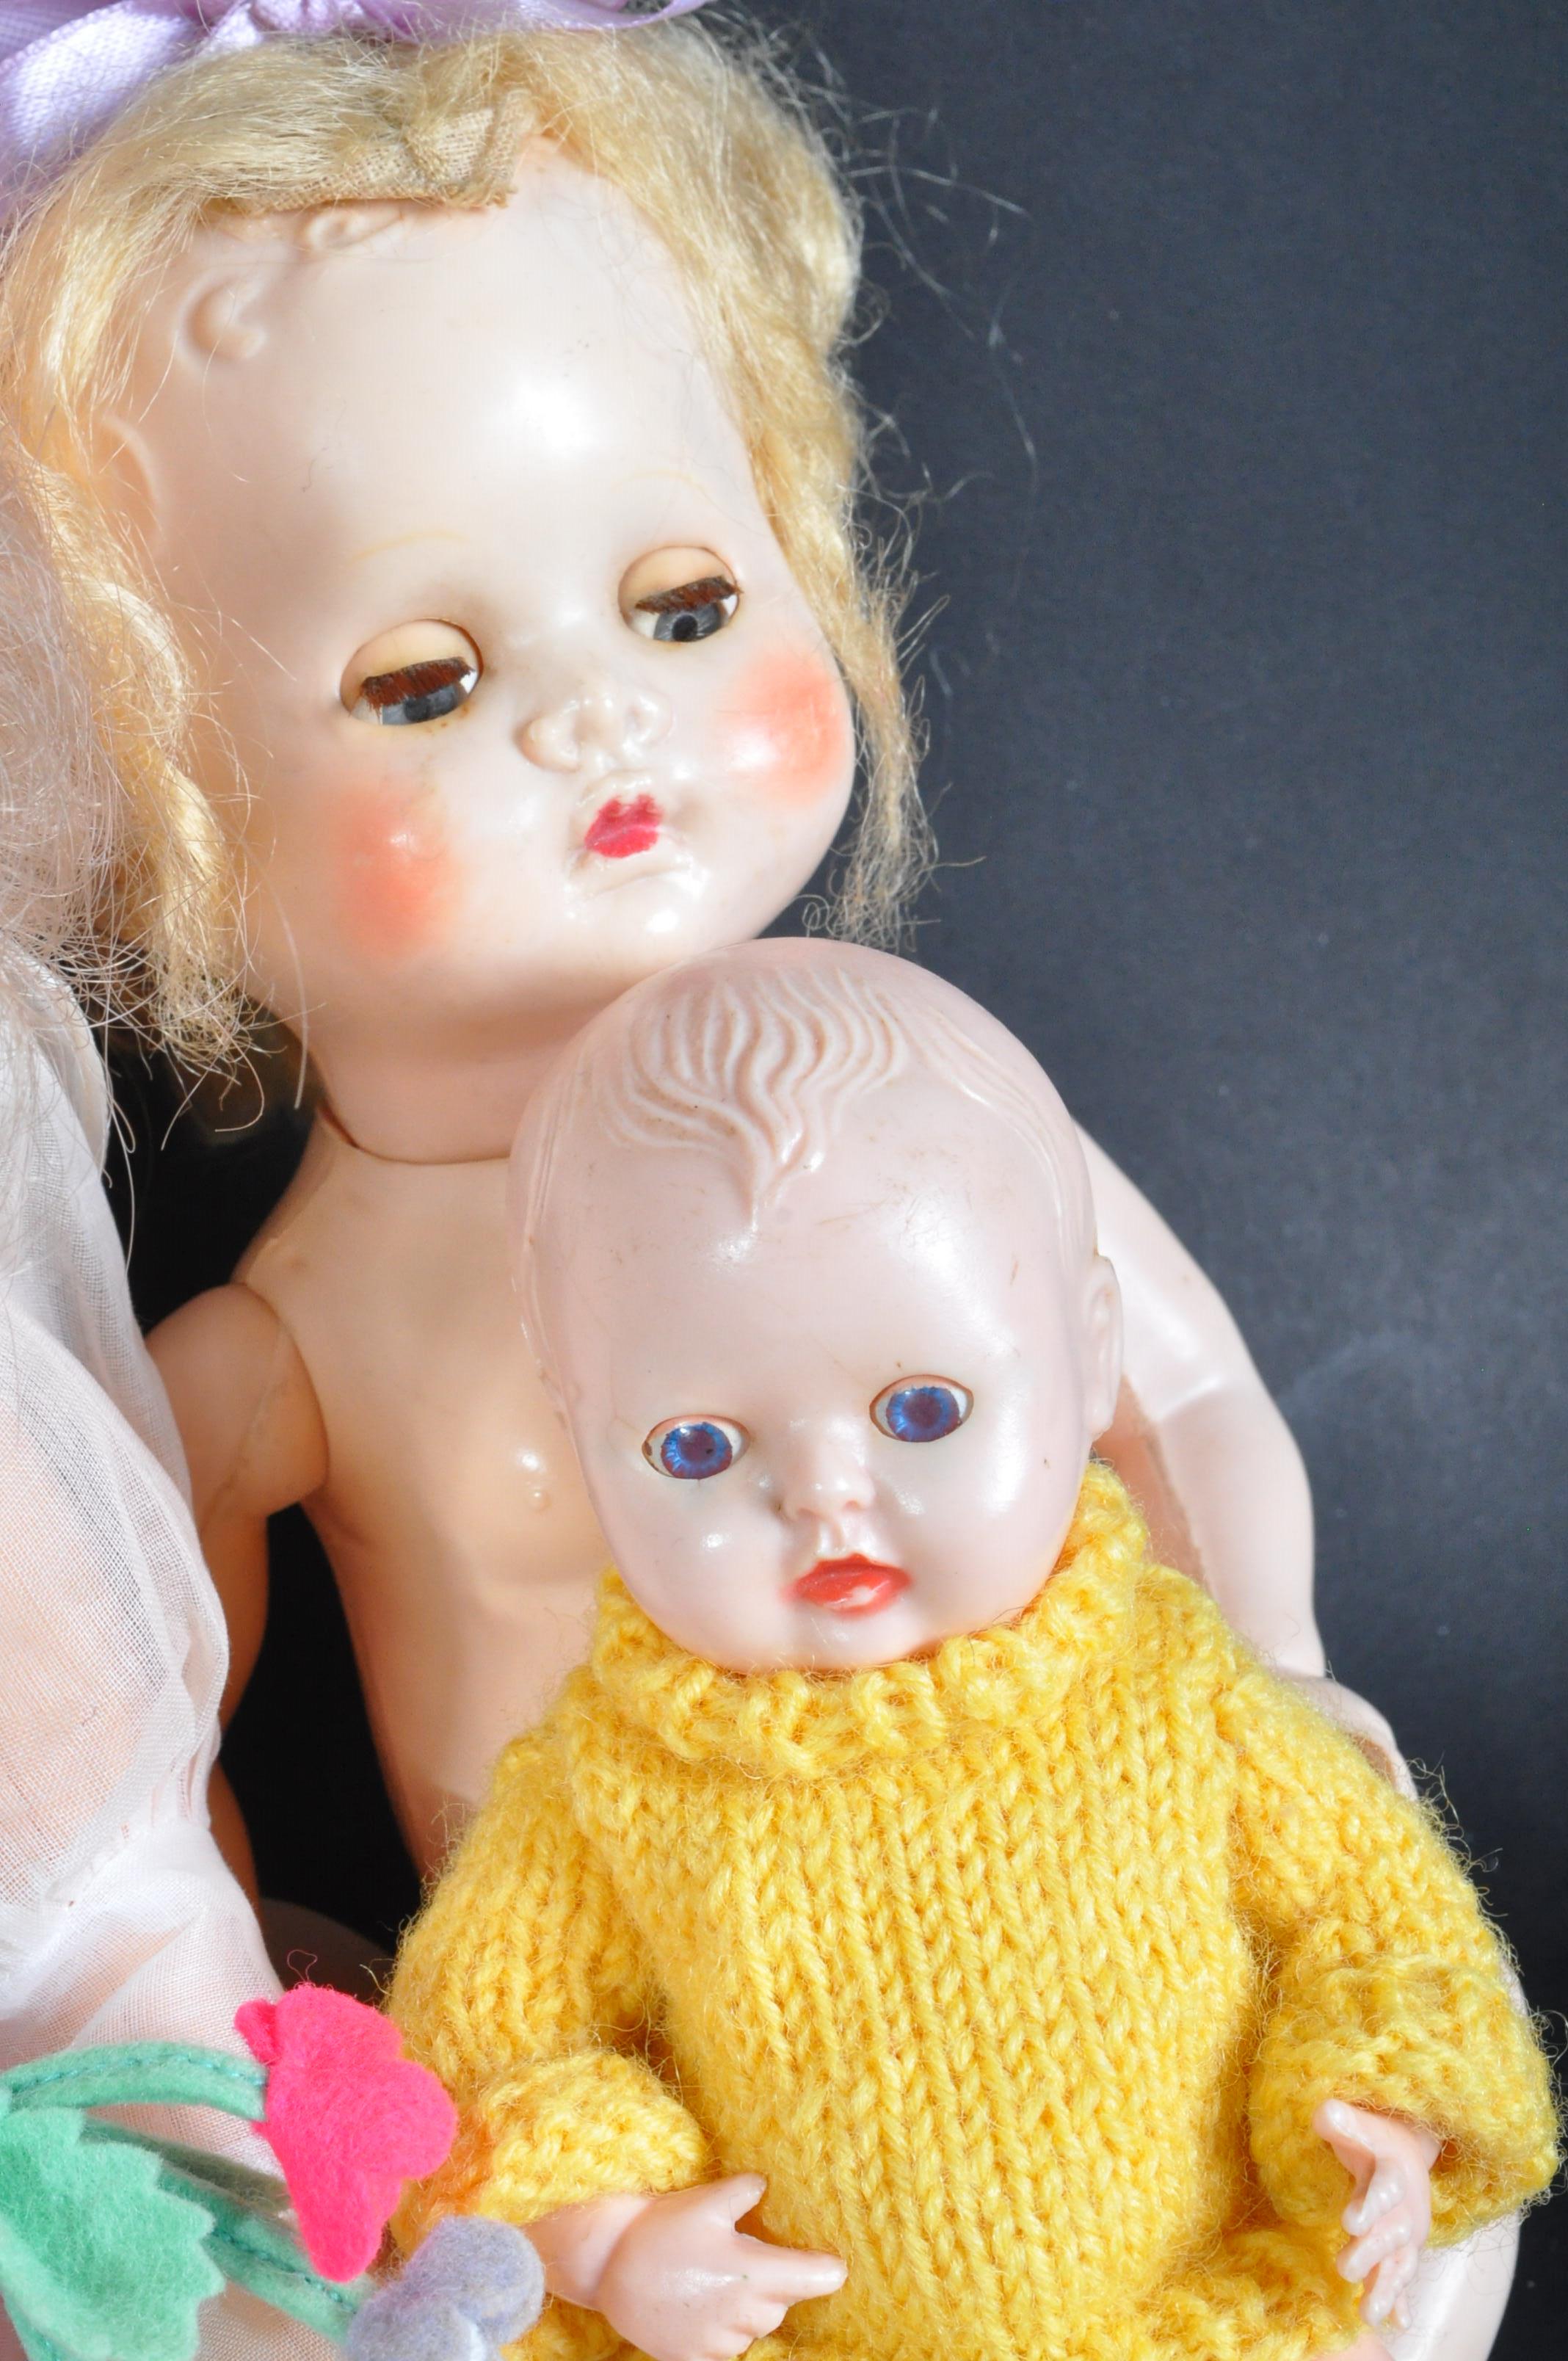 BEARS & DOLLS - A COLLECTION OF VINTAGE DOLLS & TEDDY BEAR - Image 6 of 6